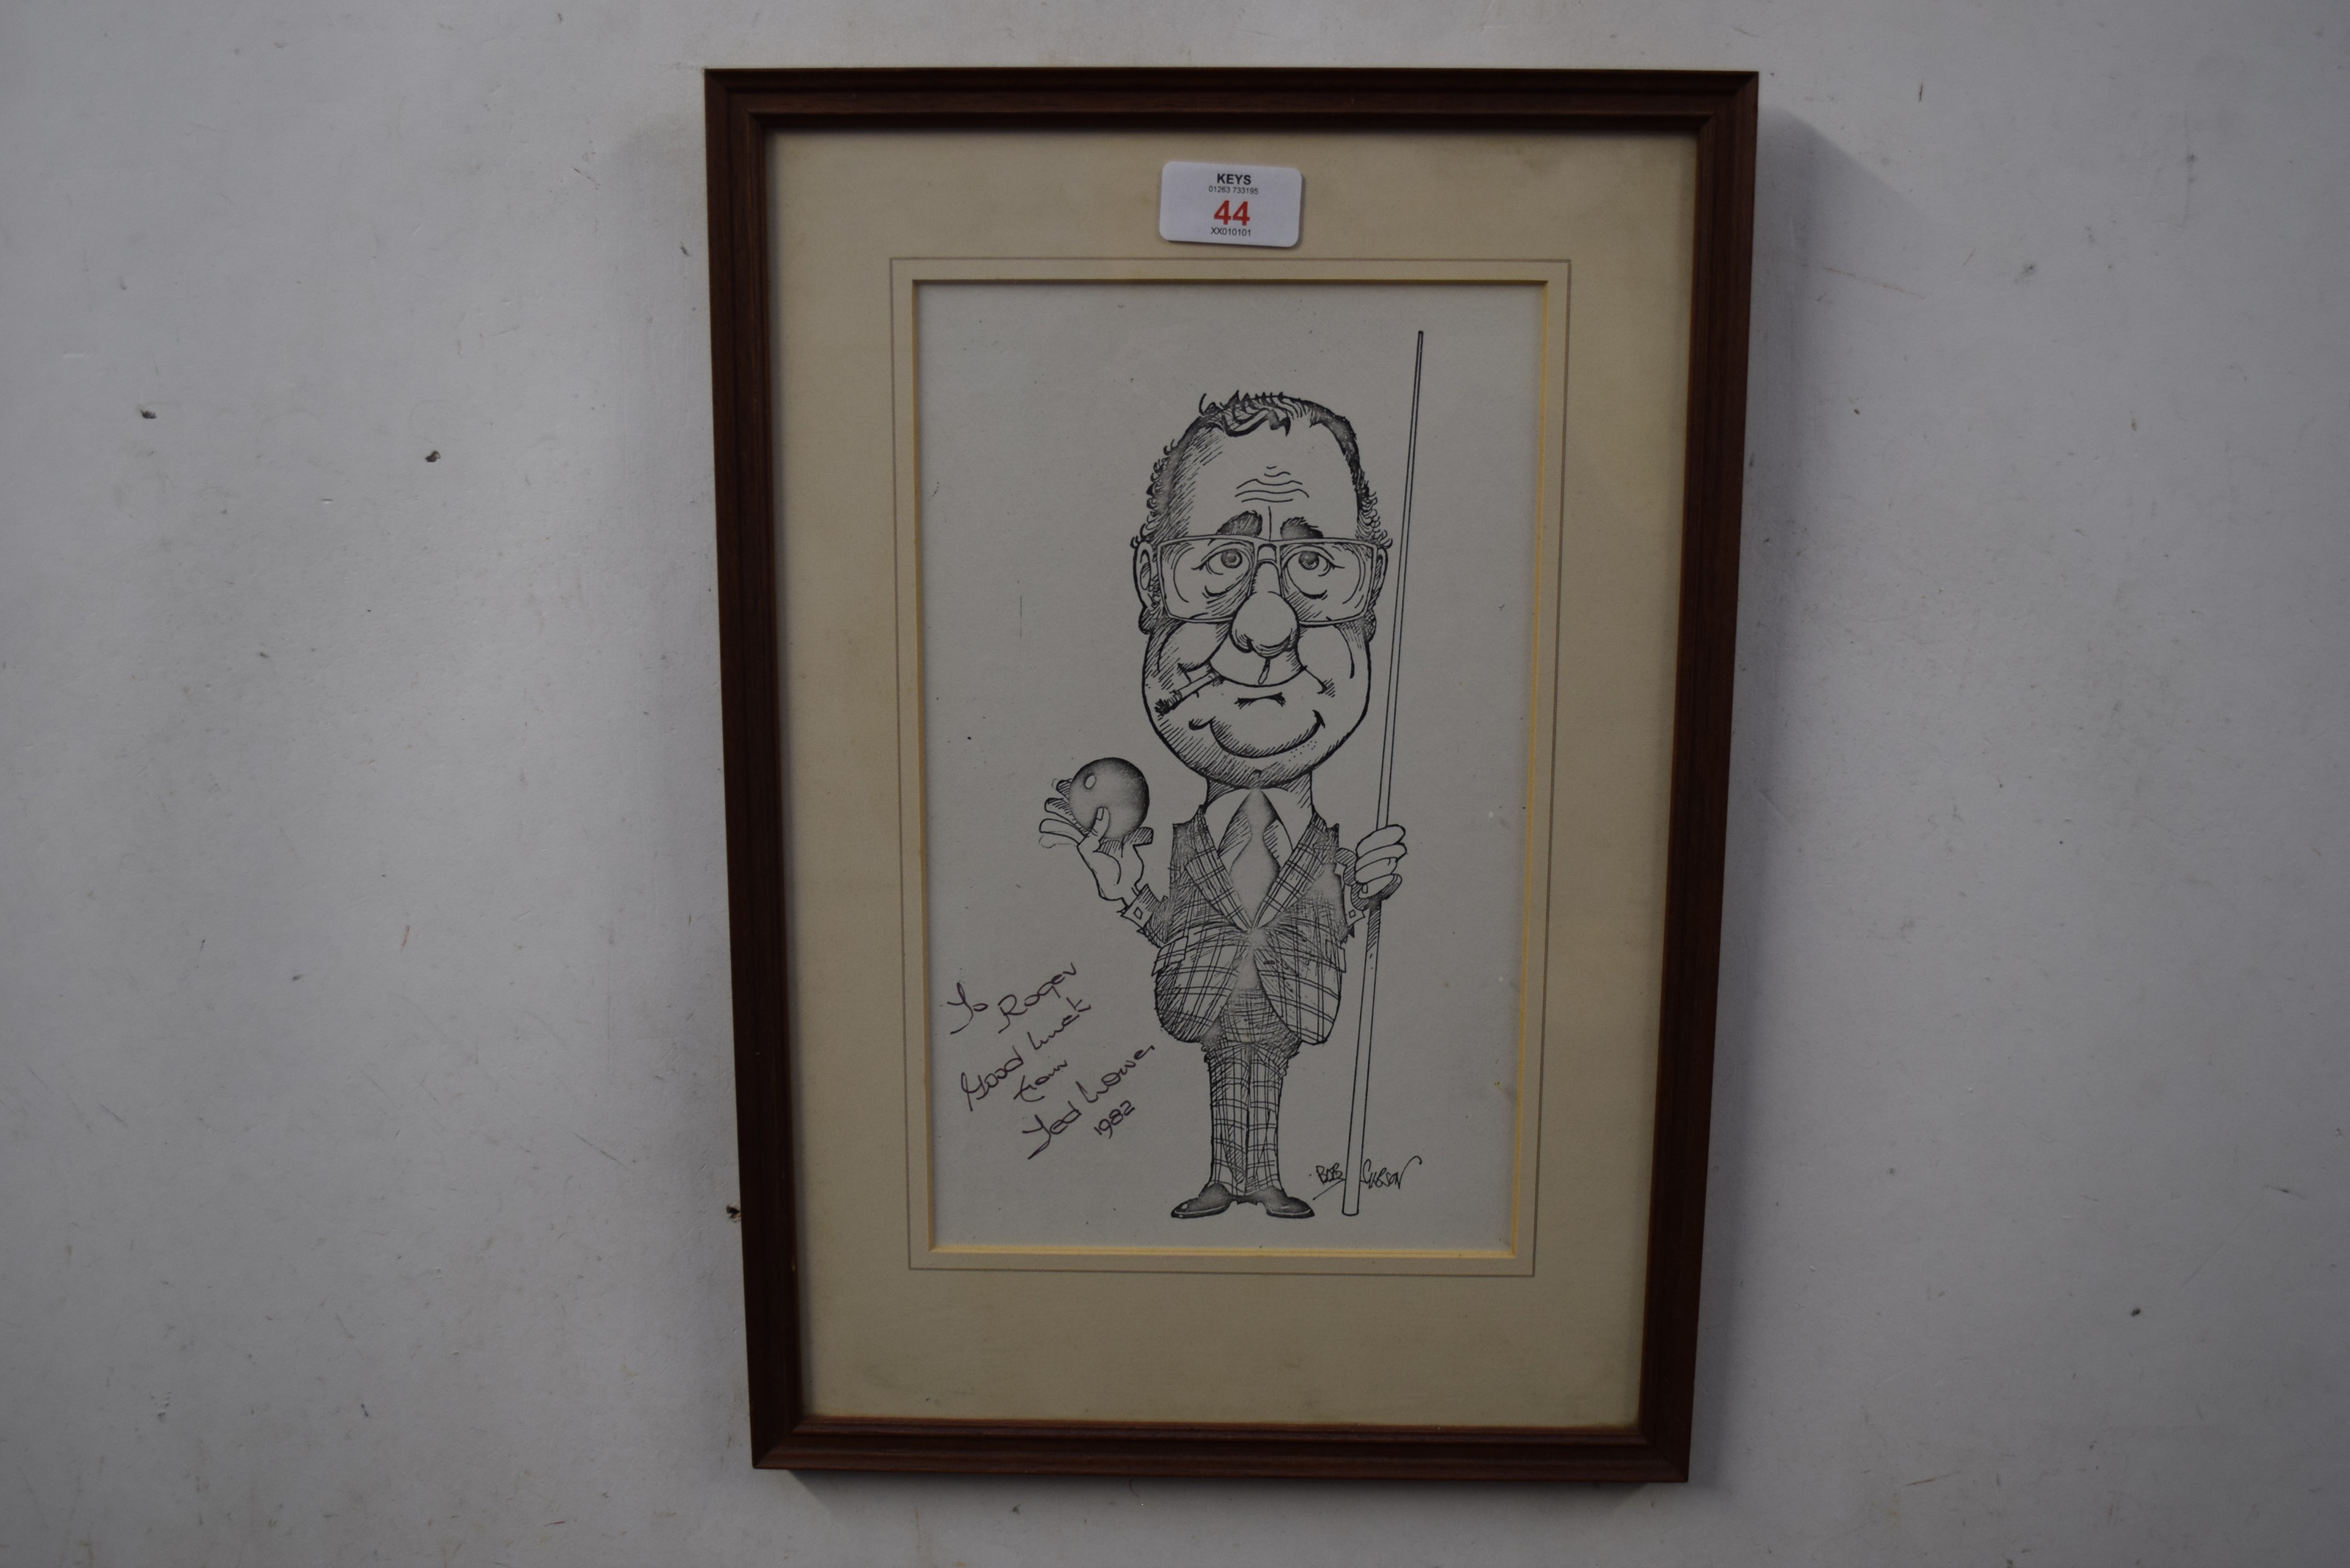 Bob Gibson, caricature of commentator Ted Lowe, black and white print with personalised presentation